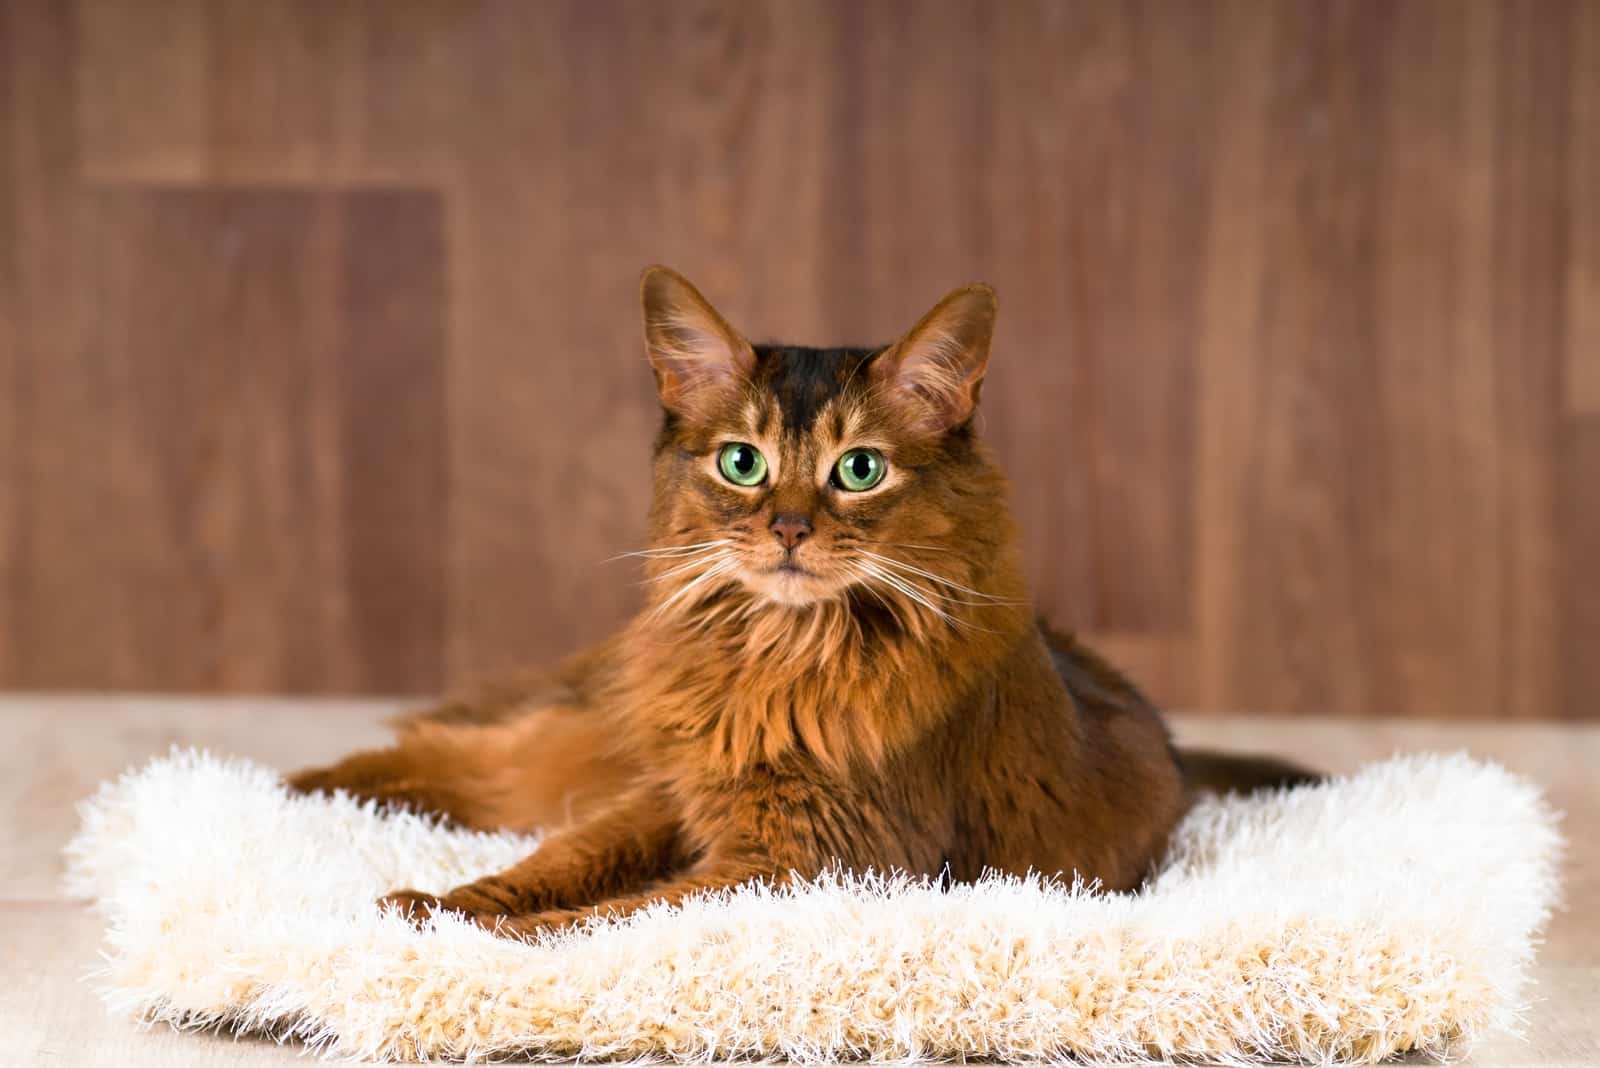 The Somali cat lies and looks ahead